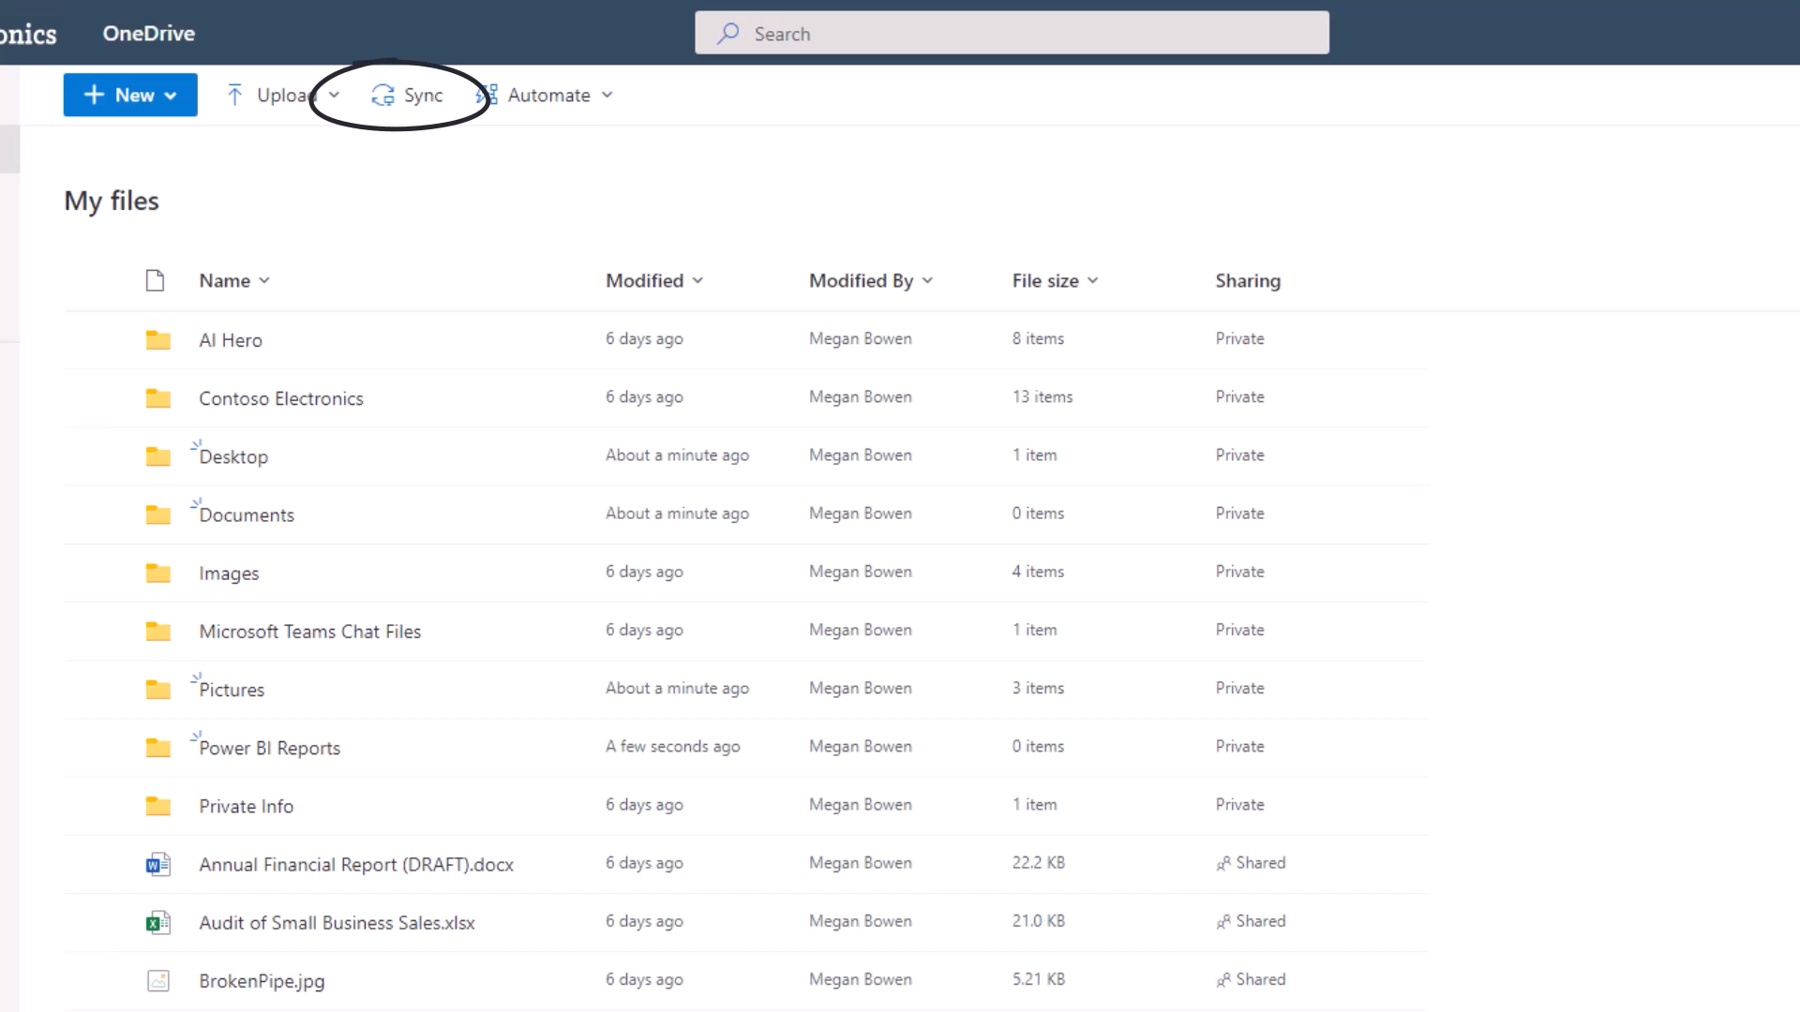 Screenshot showing files and folders in OneDrive for Business that sync